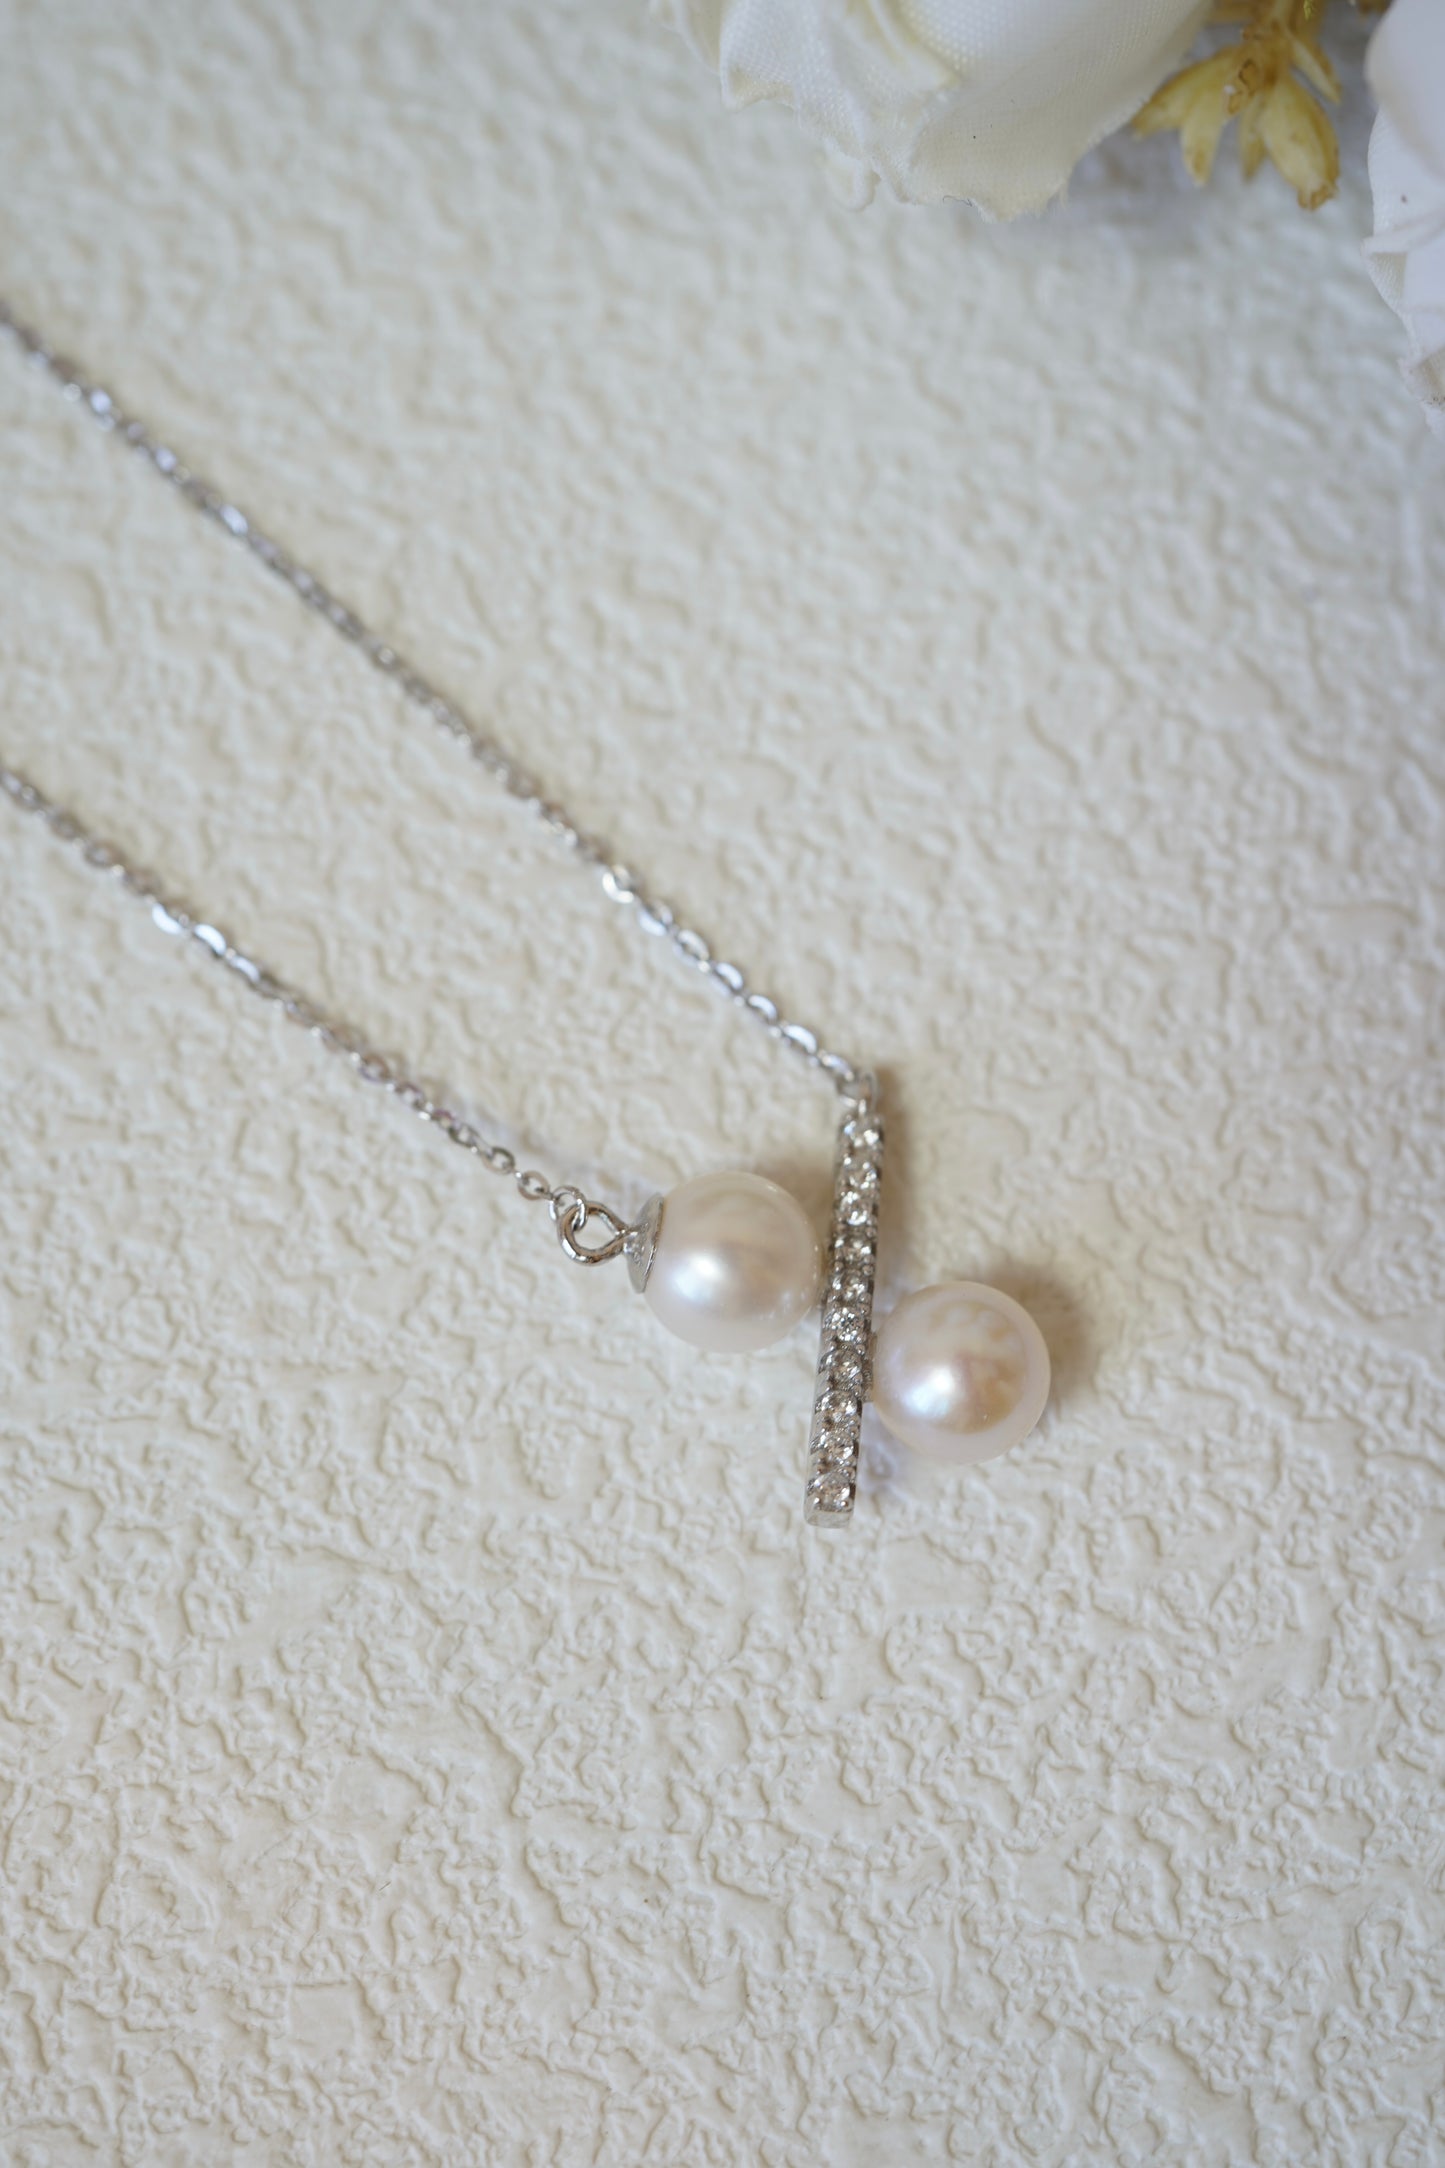 100% Natural Zircon Round Freshwater Pearls Necklace